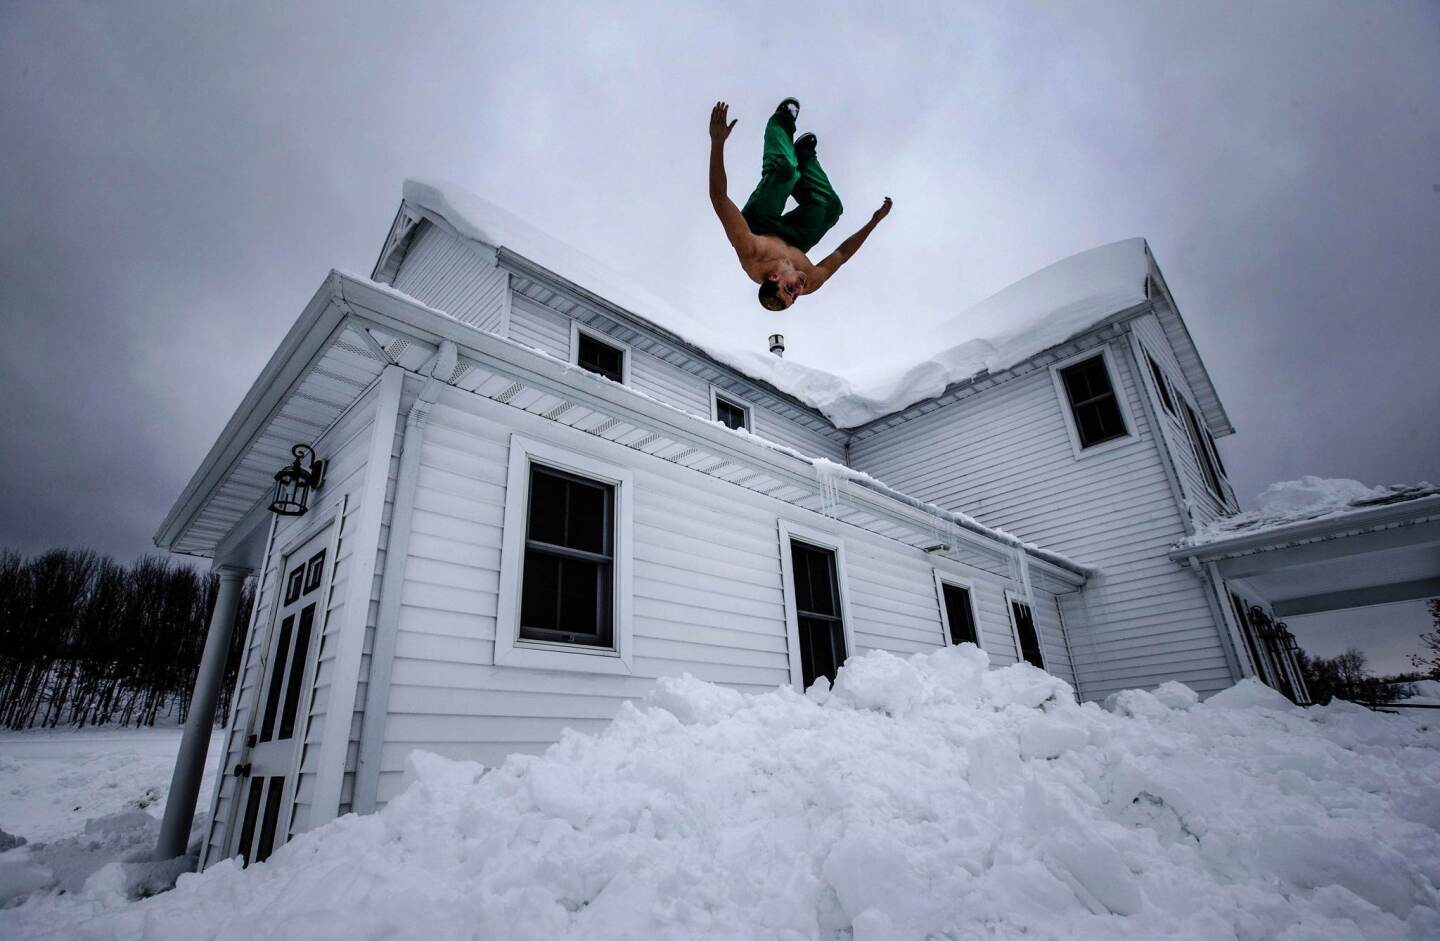 Phil Mohun does a back flip off of his family home after clearing snow from the roof following a massive snowstorm in Cowlesville, New York, November 22, 2014.